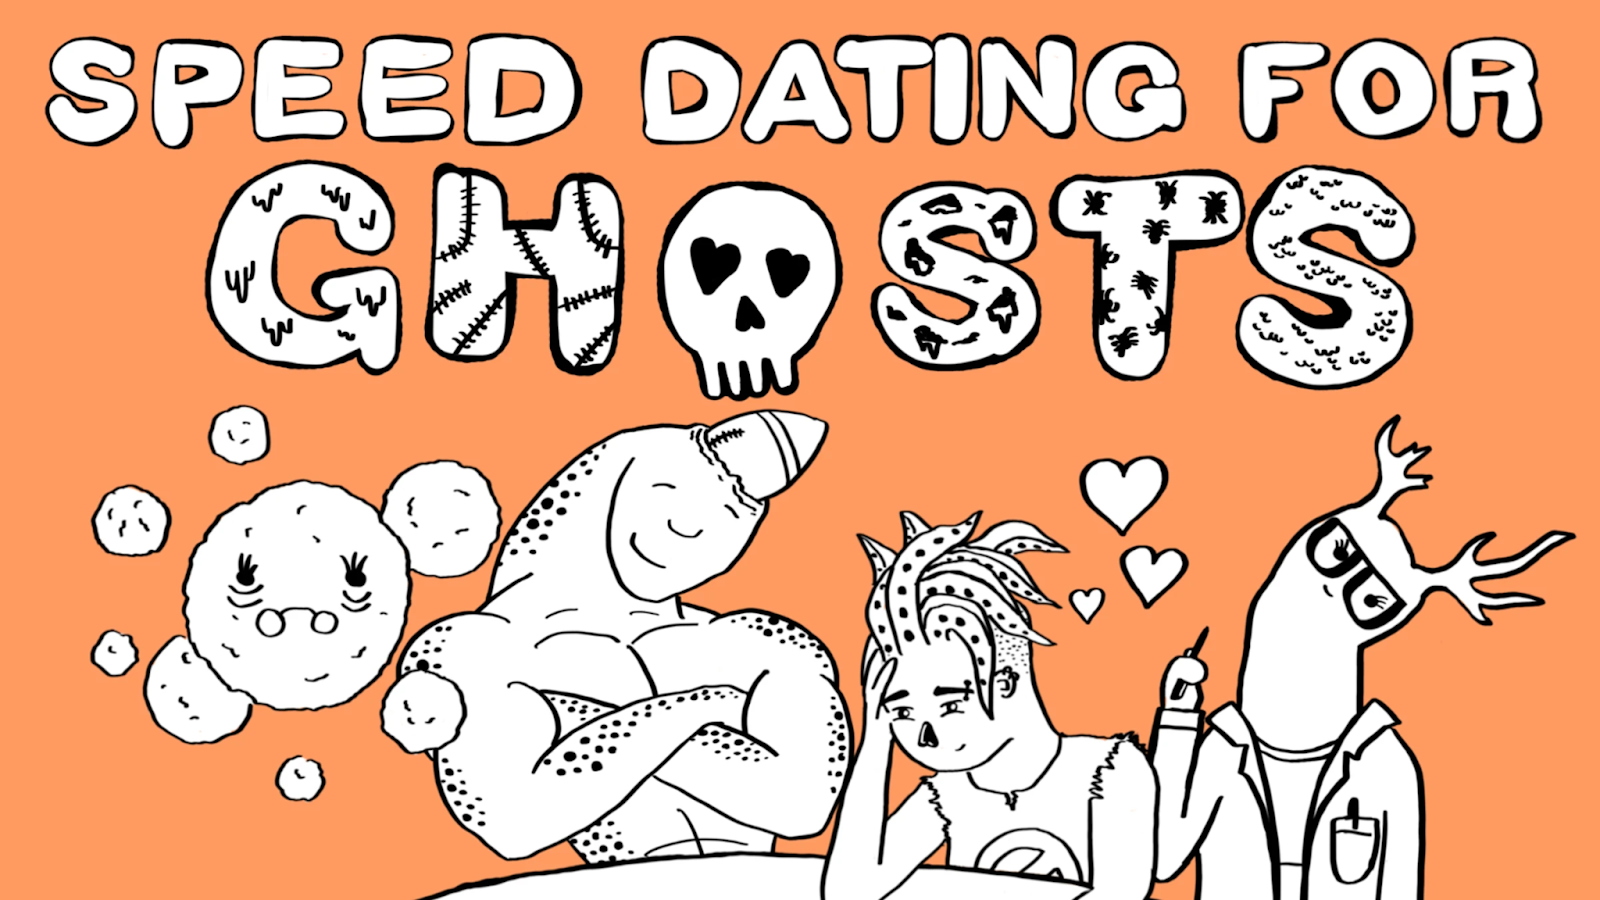 3. Speed Dating For Ghosts (2561)